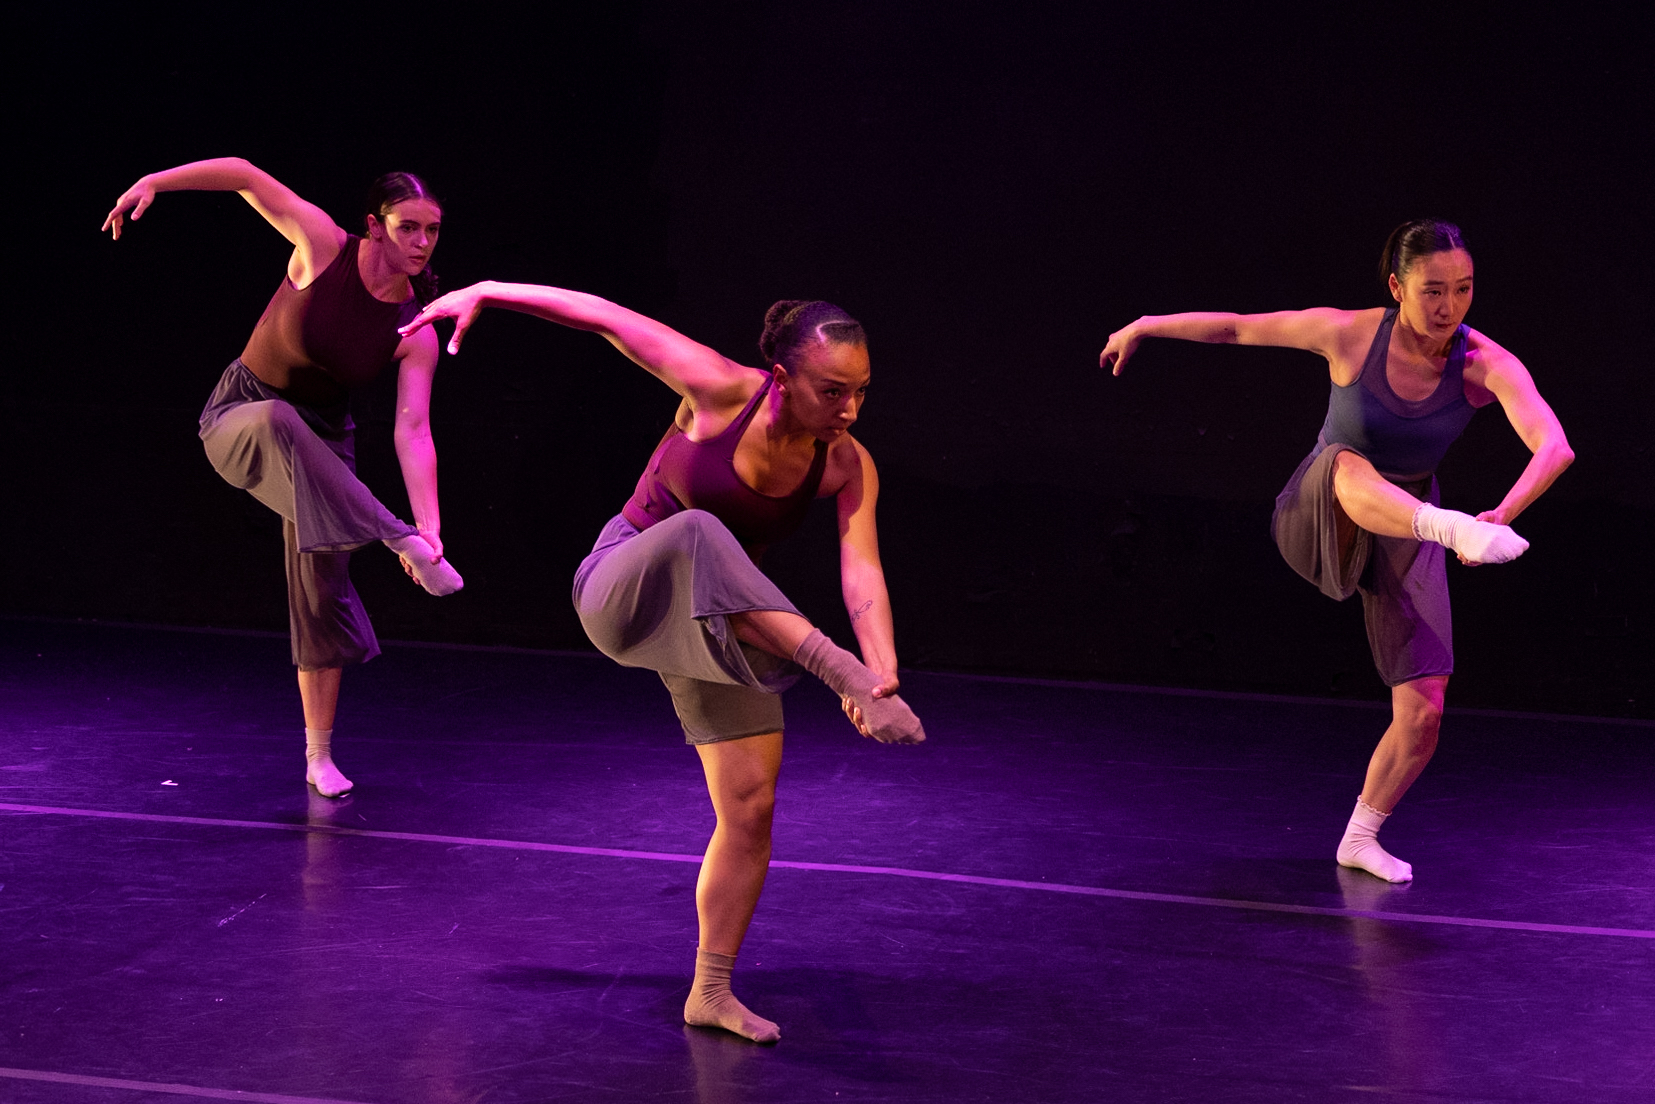 Donna Sternberg & Dancers. Photo courtesy of the artists